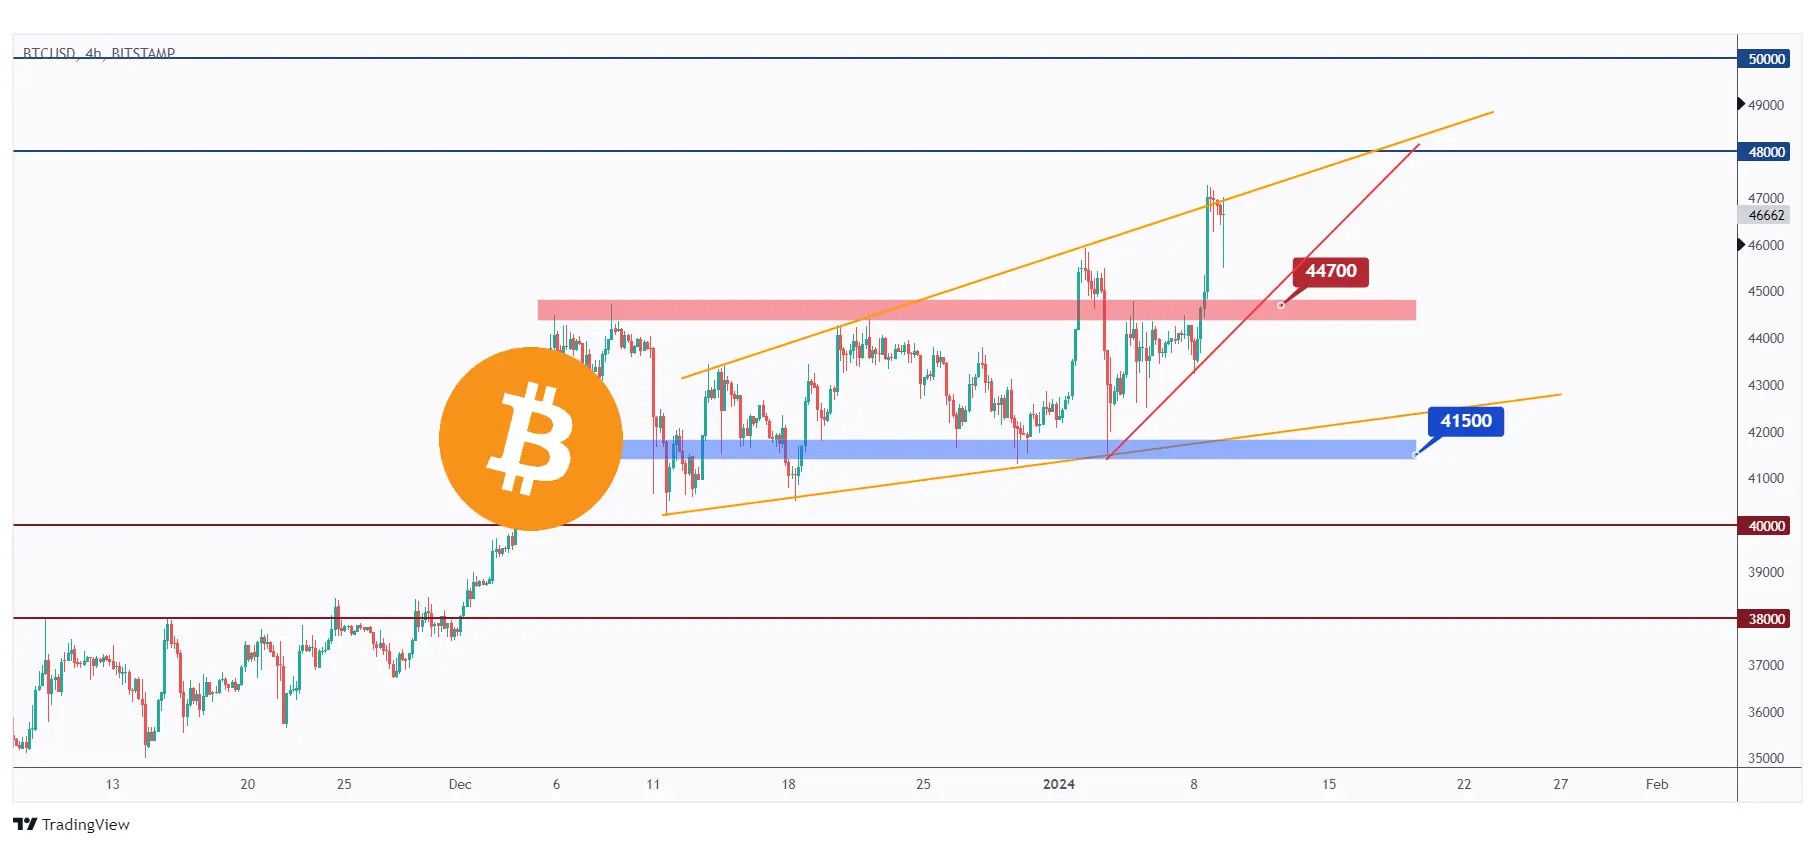 Bitcoin 4h chart showing the bulls in control and approaching a resistance zone.